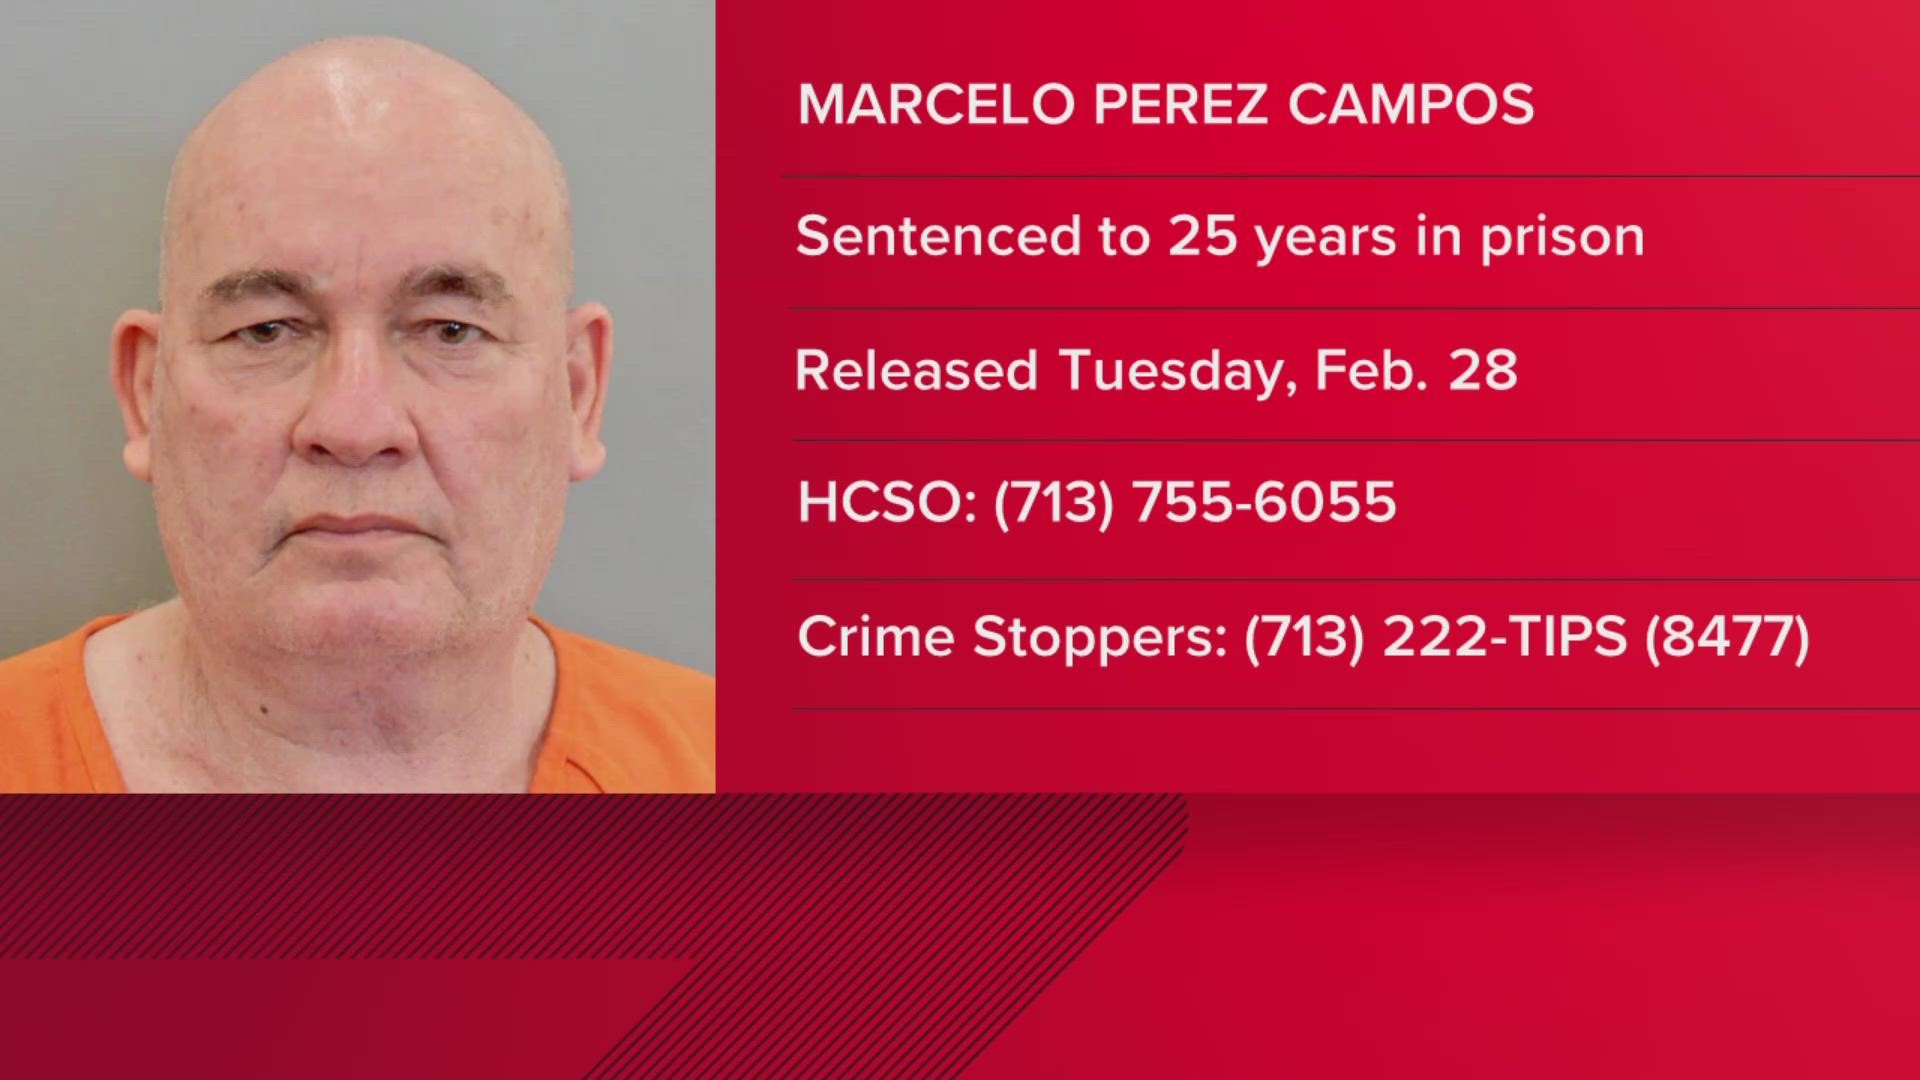 Marcelo Perez Campos was released by mistake, according to the sheriff's office. He had been sentenced to 25 years for assault of a family member.